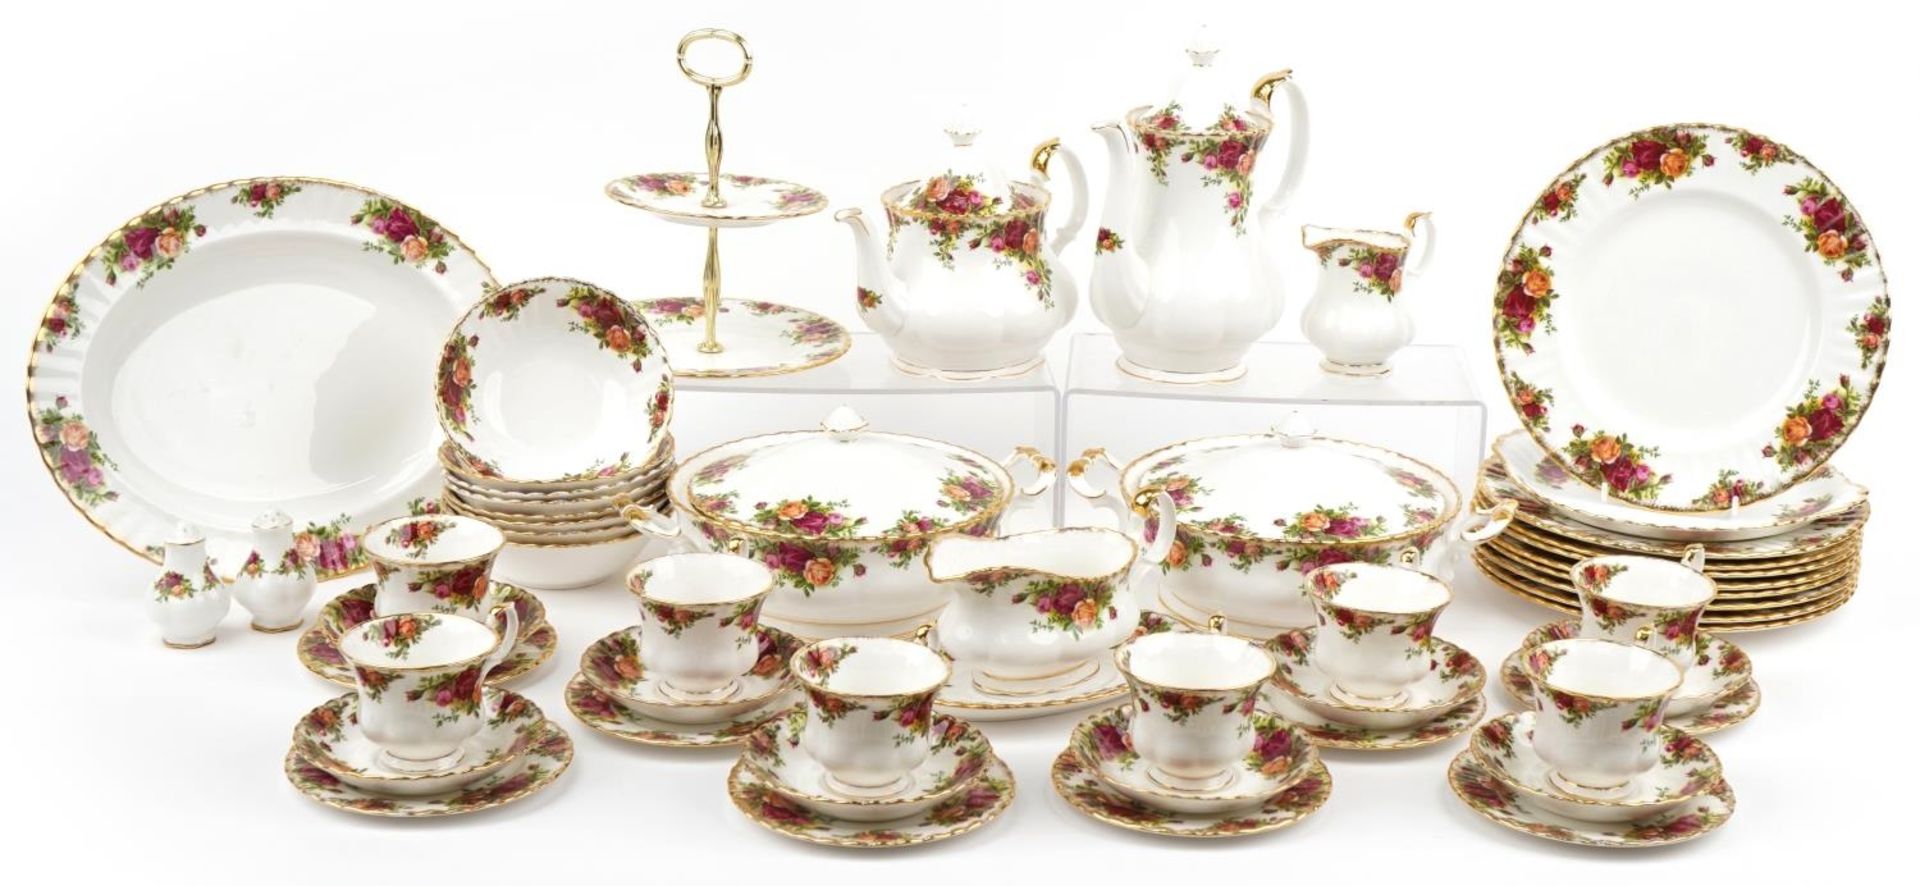 Royal Albert Old Country Roses dinner and teaware including teapot, coffee pot, two lidded